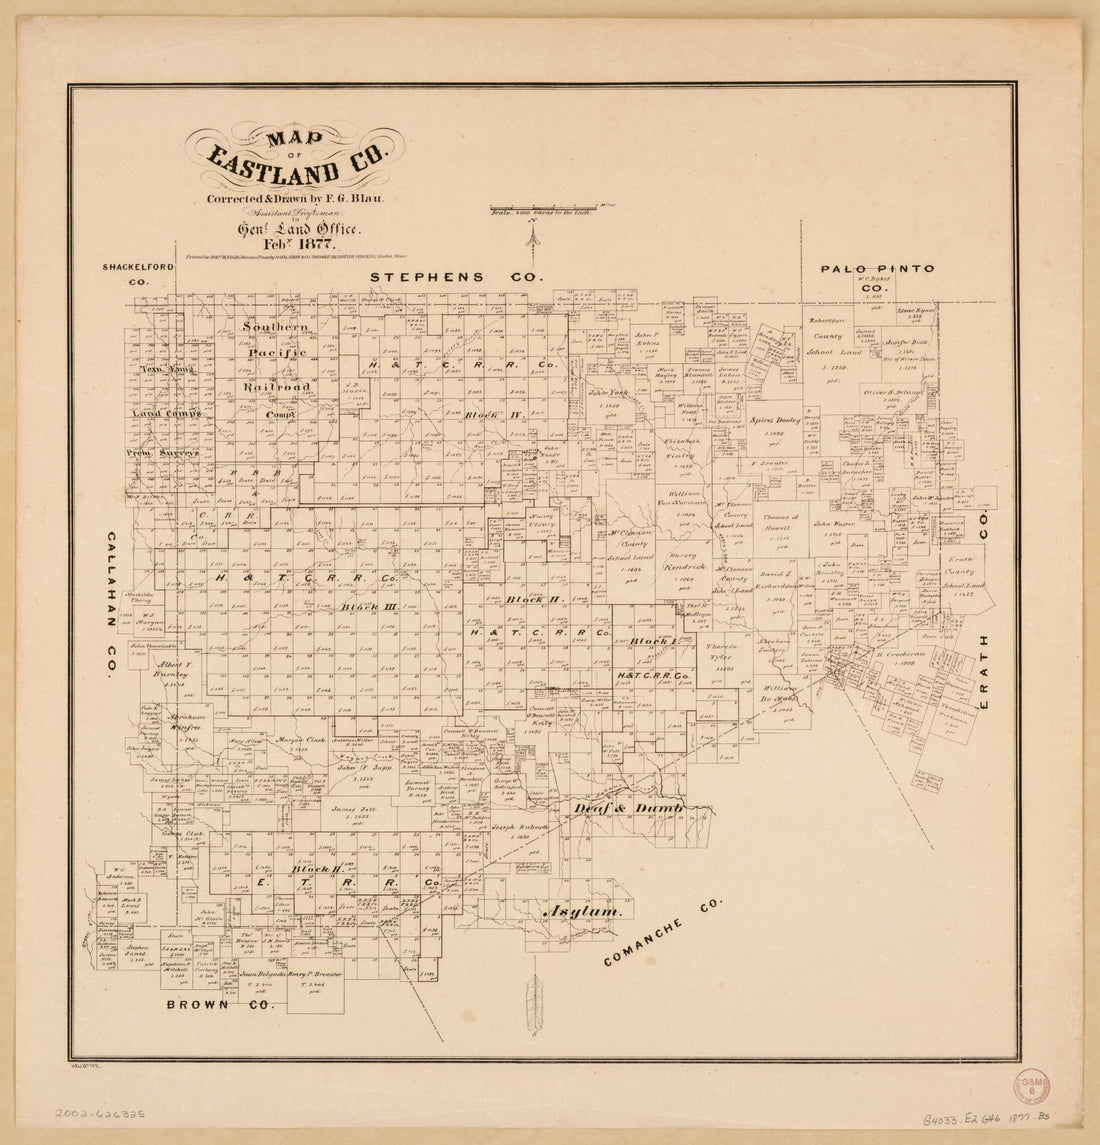 This old map of Map of Eastland Co from 1877 was created by F. G. Blau,  Rand Avery Supply Co in 1877